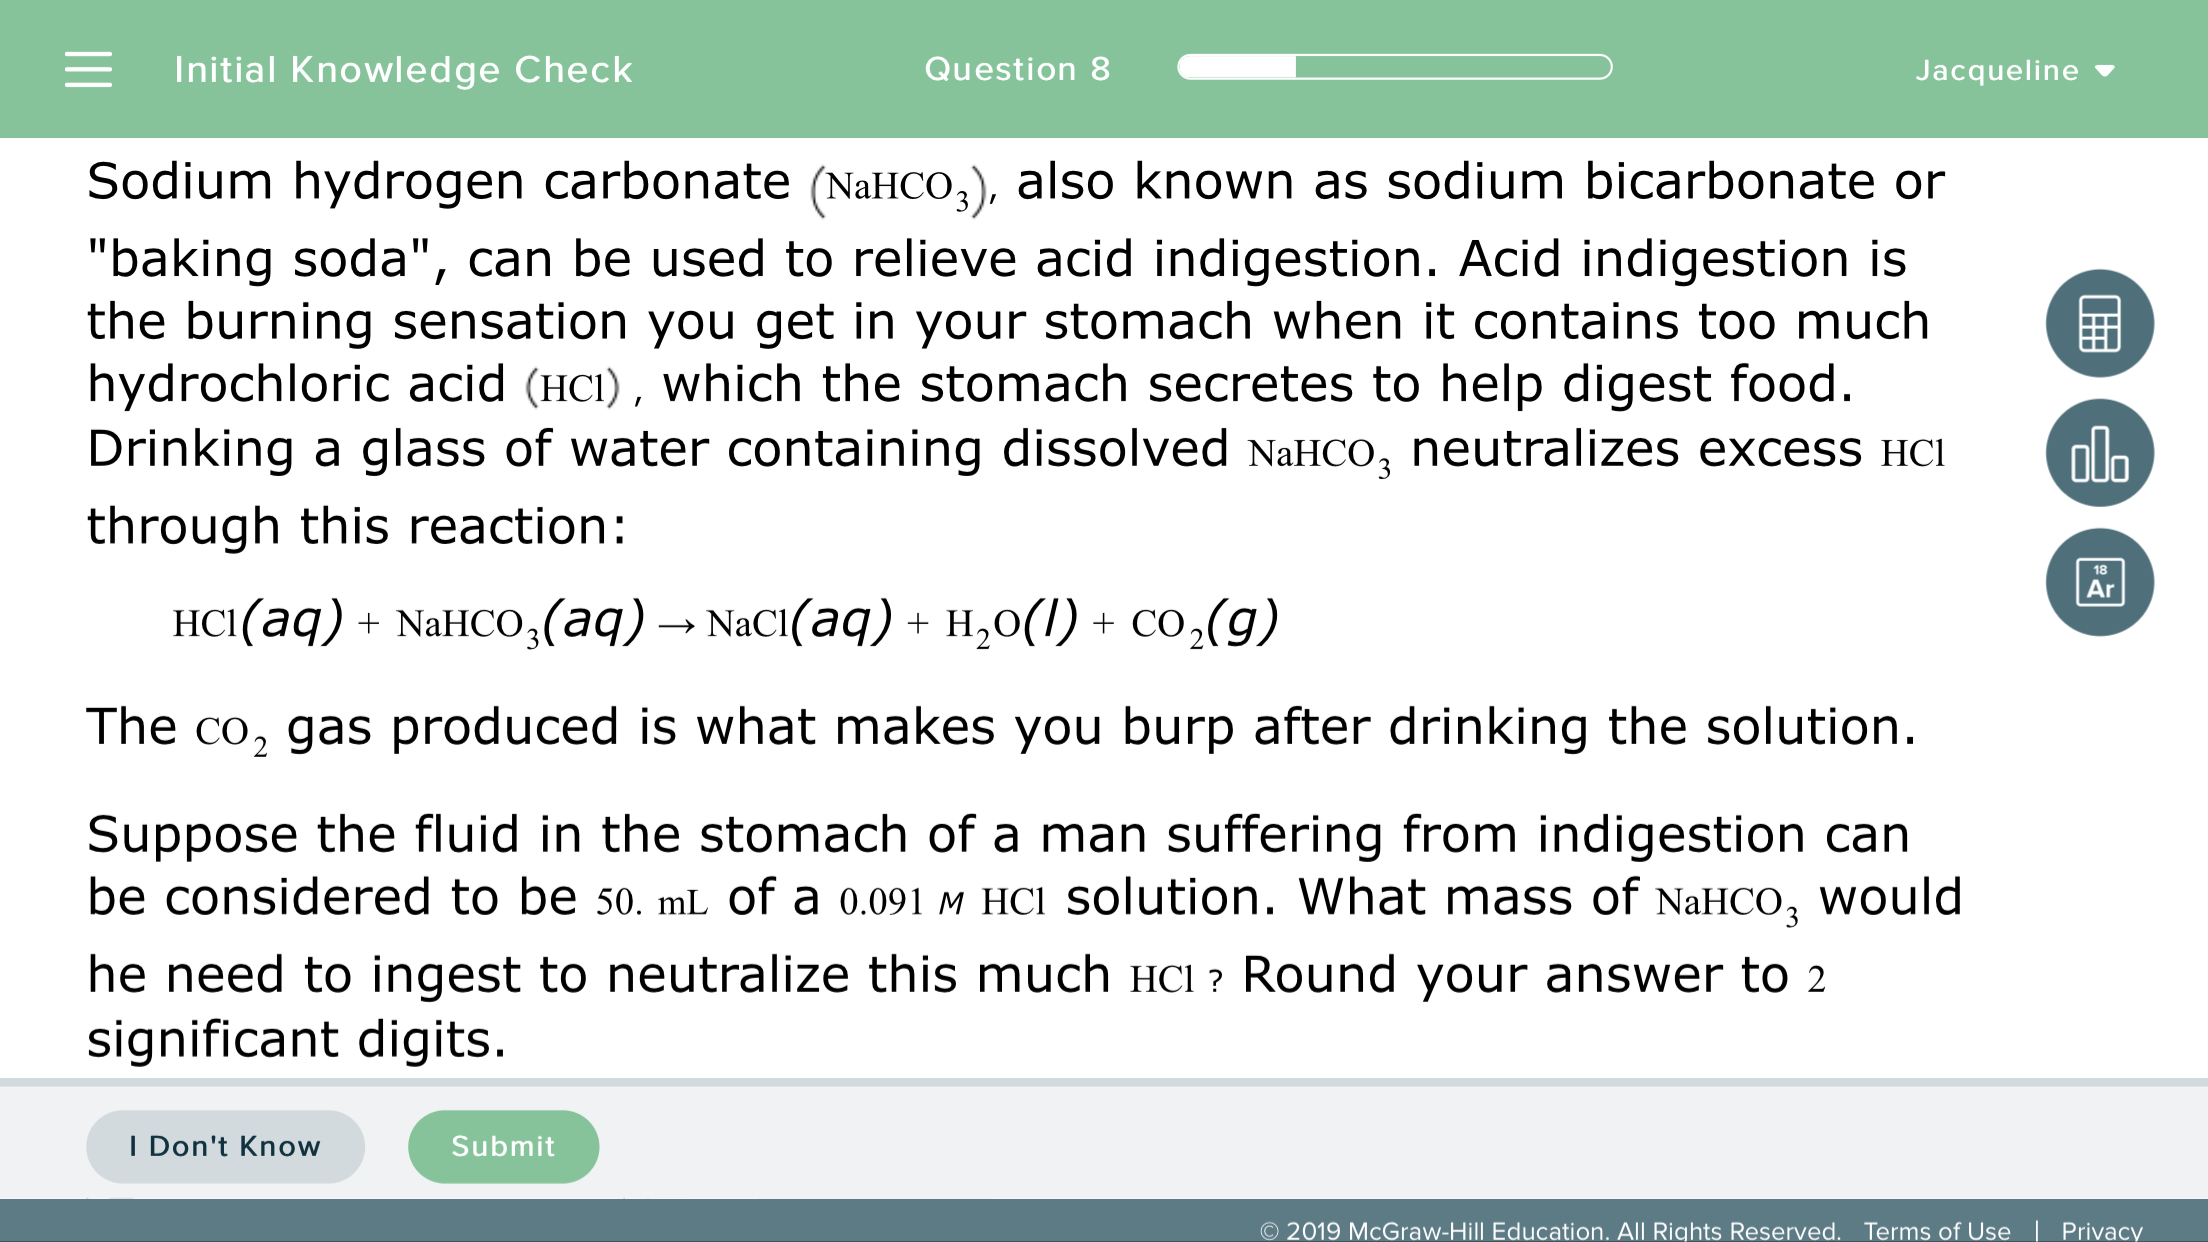 Initial Knowledge Check
Question 8
Jacqueline
Sodium hydrogen carbonate (NaHCo,), also known as sodium bicarbonate or
"baking soda", can be used to relieve acid indigestion. Acid indigestion is
the burning sensation you get in your stomach when it contains too much
hydrochloric acid (HcI), which the stomach secretes to help digest food
Drinking a glass of water containing dissolved NaHCO3 neutralizes excess HCI
through this reaction:
alo
18
HCI(aq) + NaHCO3(aq) → NaCl(aq)
H20(l) + CO2(g)
The co, gas produced is what makes you burp after drinking the solution
Suppose the fluid in the stomach of a man suffering from indigestion can
be considered to be 50. mL of a 0.091 M HCI solution. What mass of NaHCO, would
he need to ingest to neutralize this much HCl? Round your answer to 2
significant digits
Don't Know
Submit
O 2019 McGraw-Hill Education. All Rights Reserved. Terms of Use |Privacy
